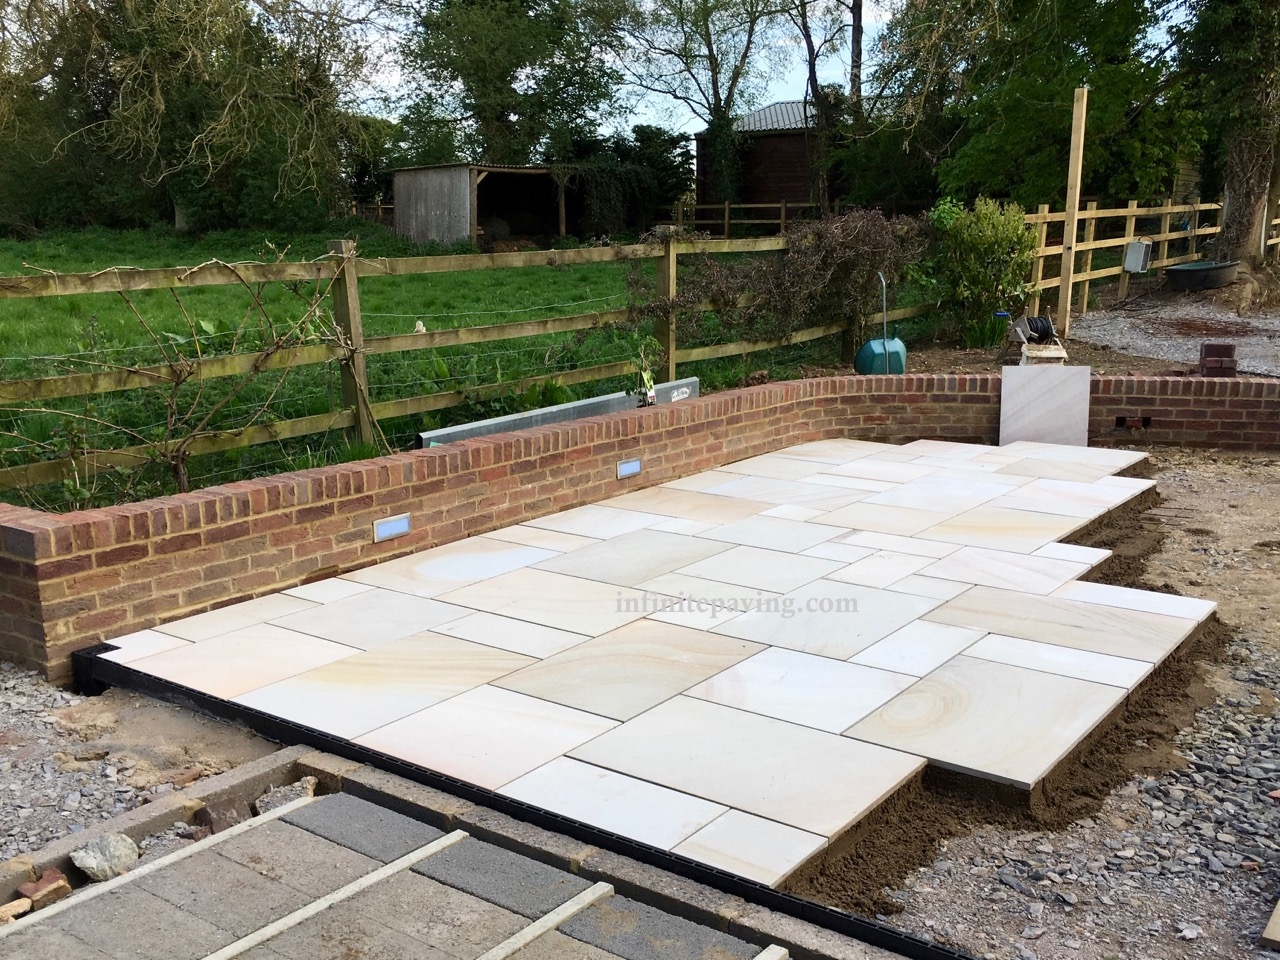 Sawn Camel Dust Shotblast Mixed Patio Paving Stone Pack 22mm 17.5m² – Indian Sandstone – £30 Per M² – Infinite Paving